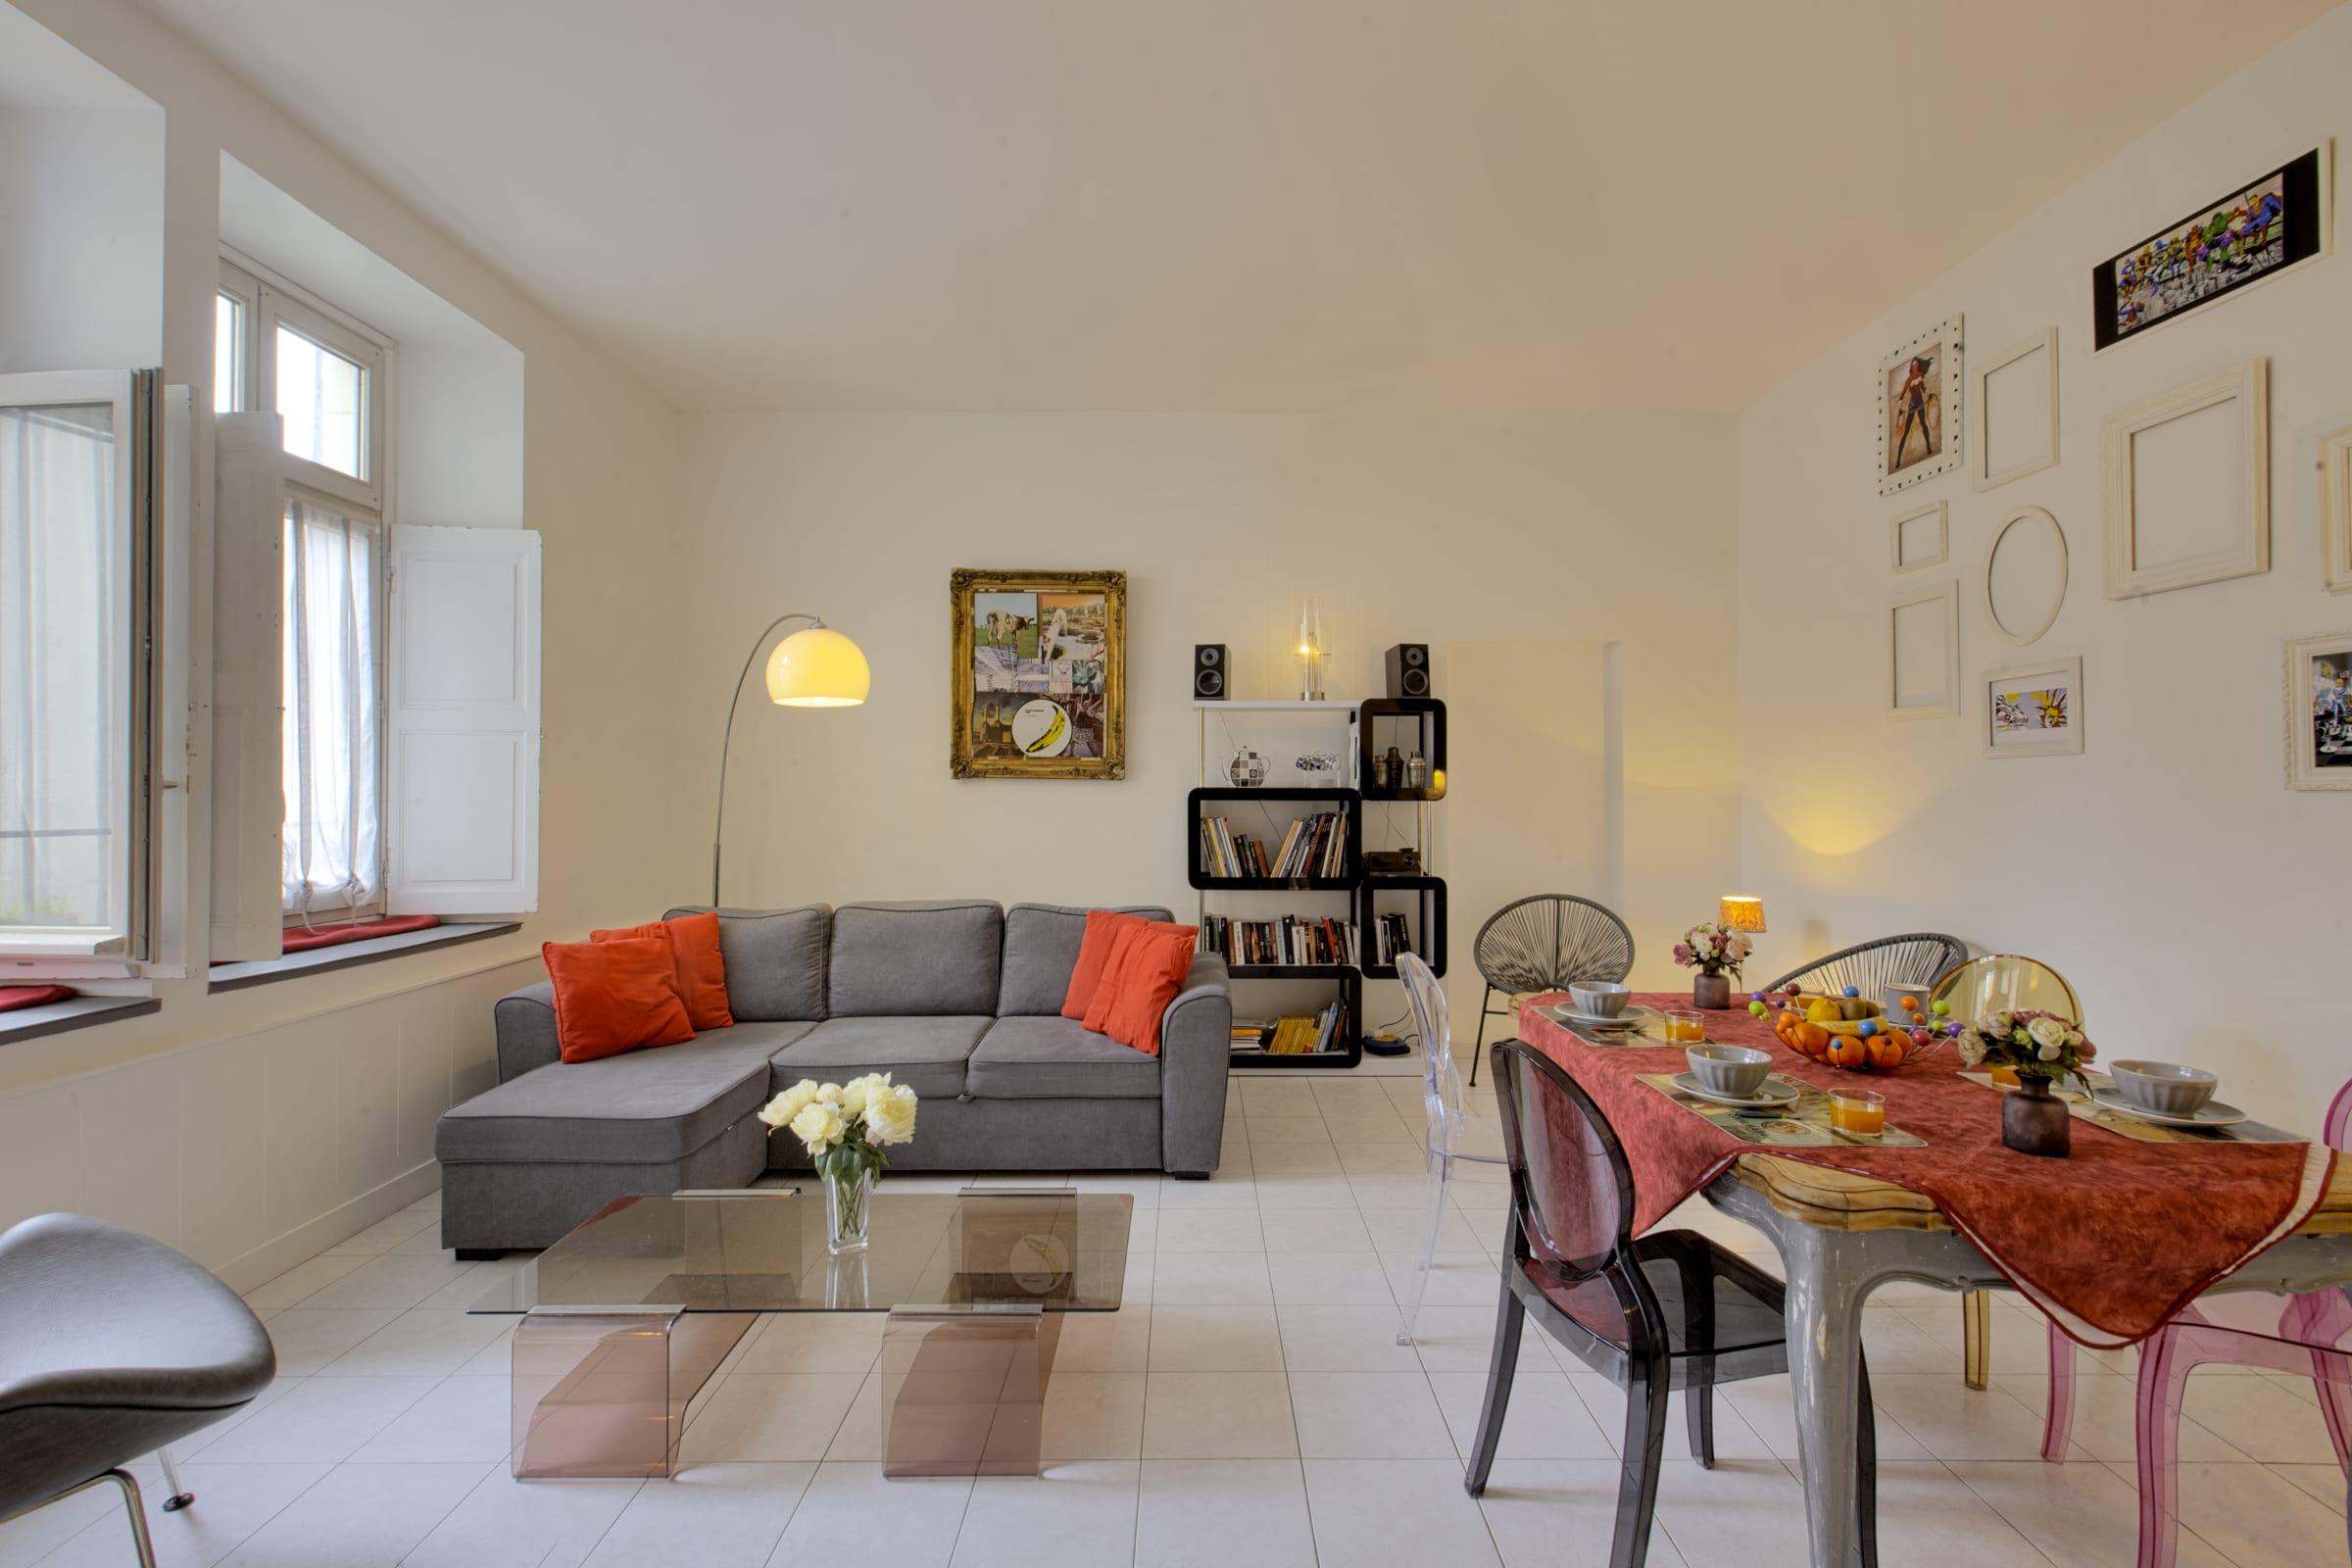 Property Image 1 - Nice and bright flat just nearby central Biarritz